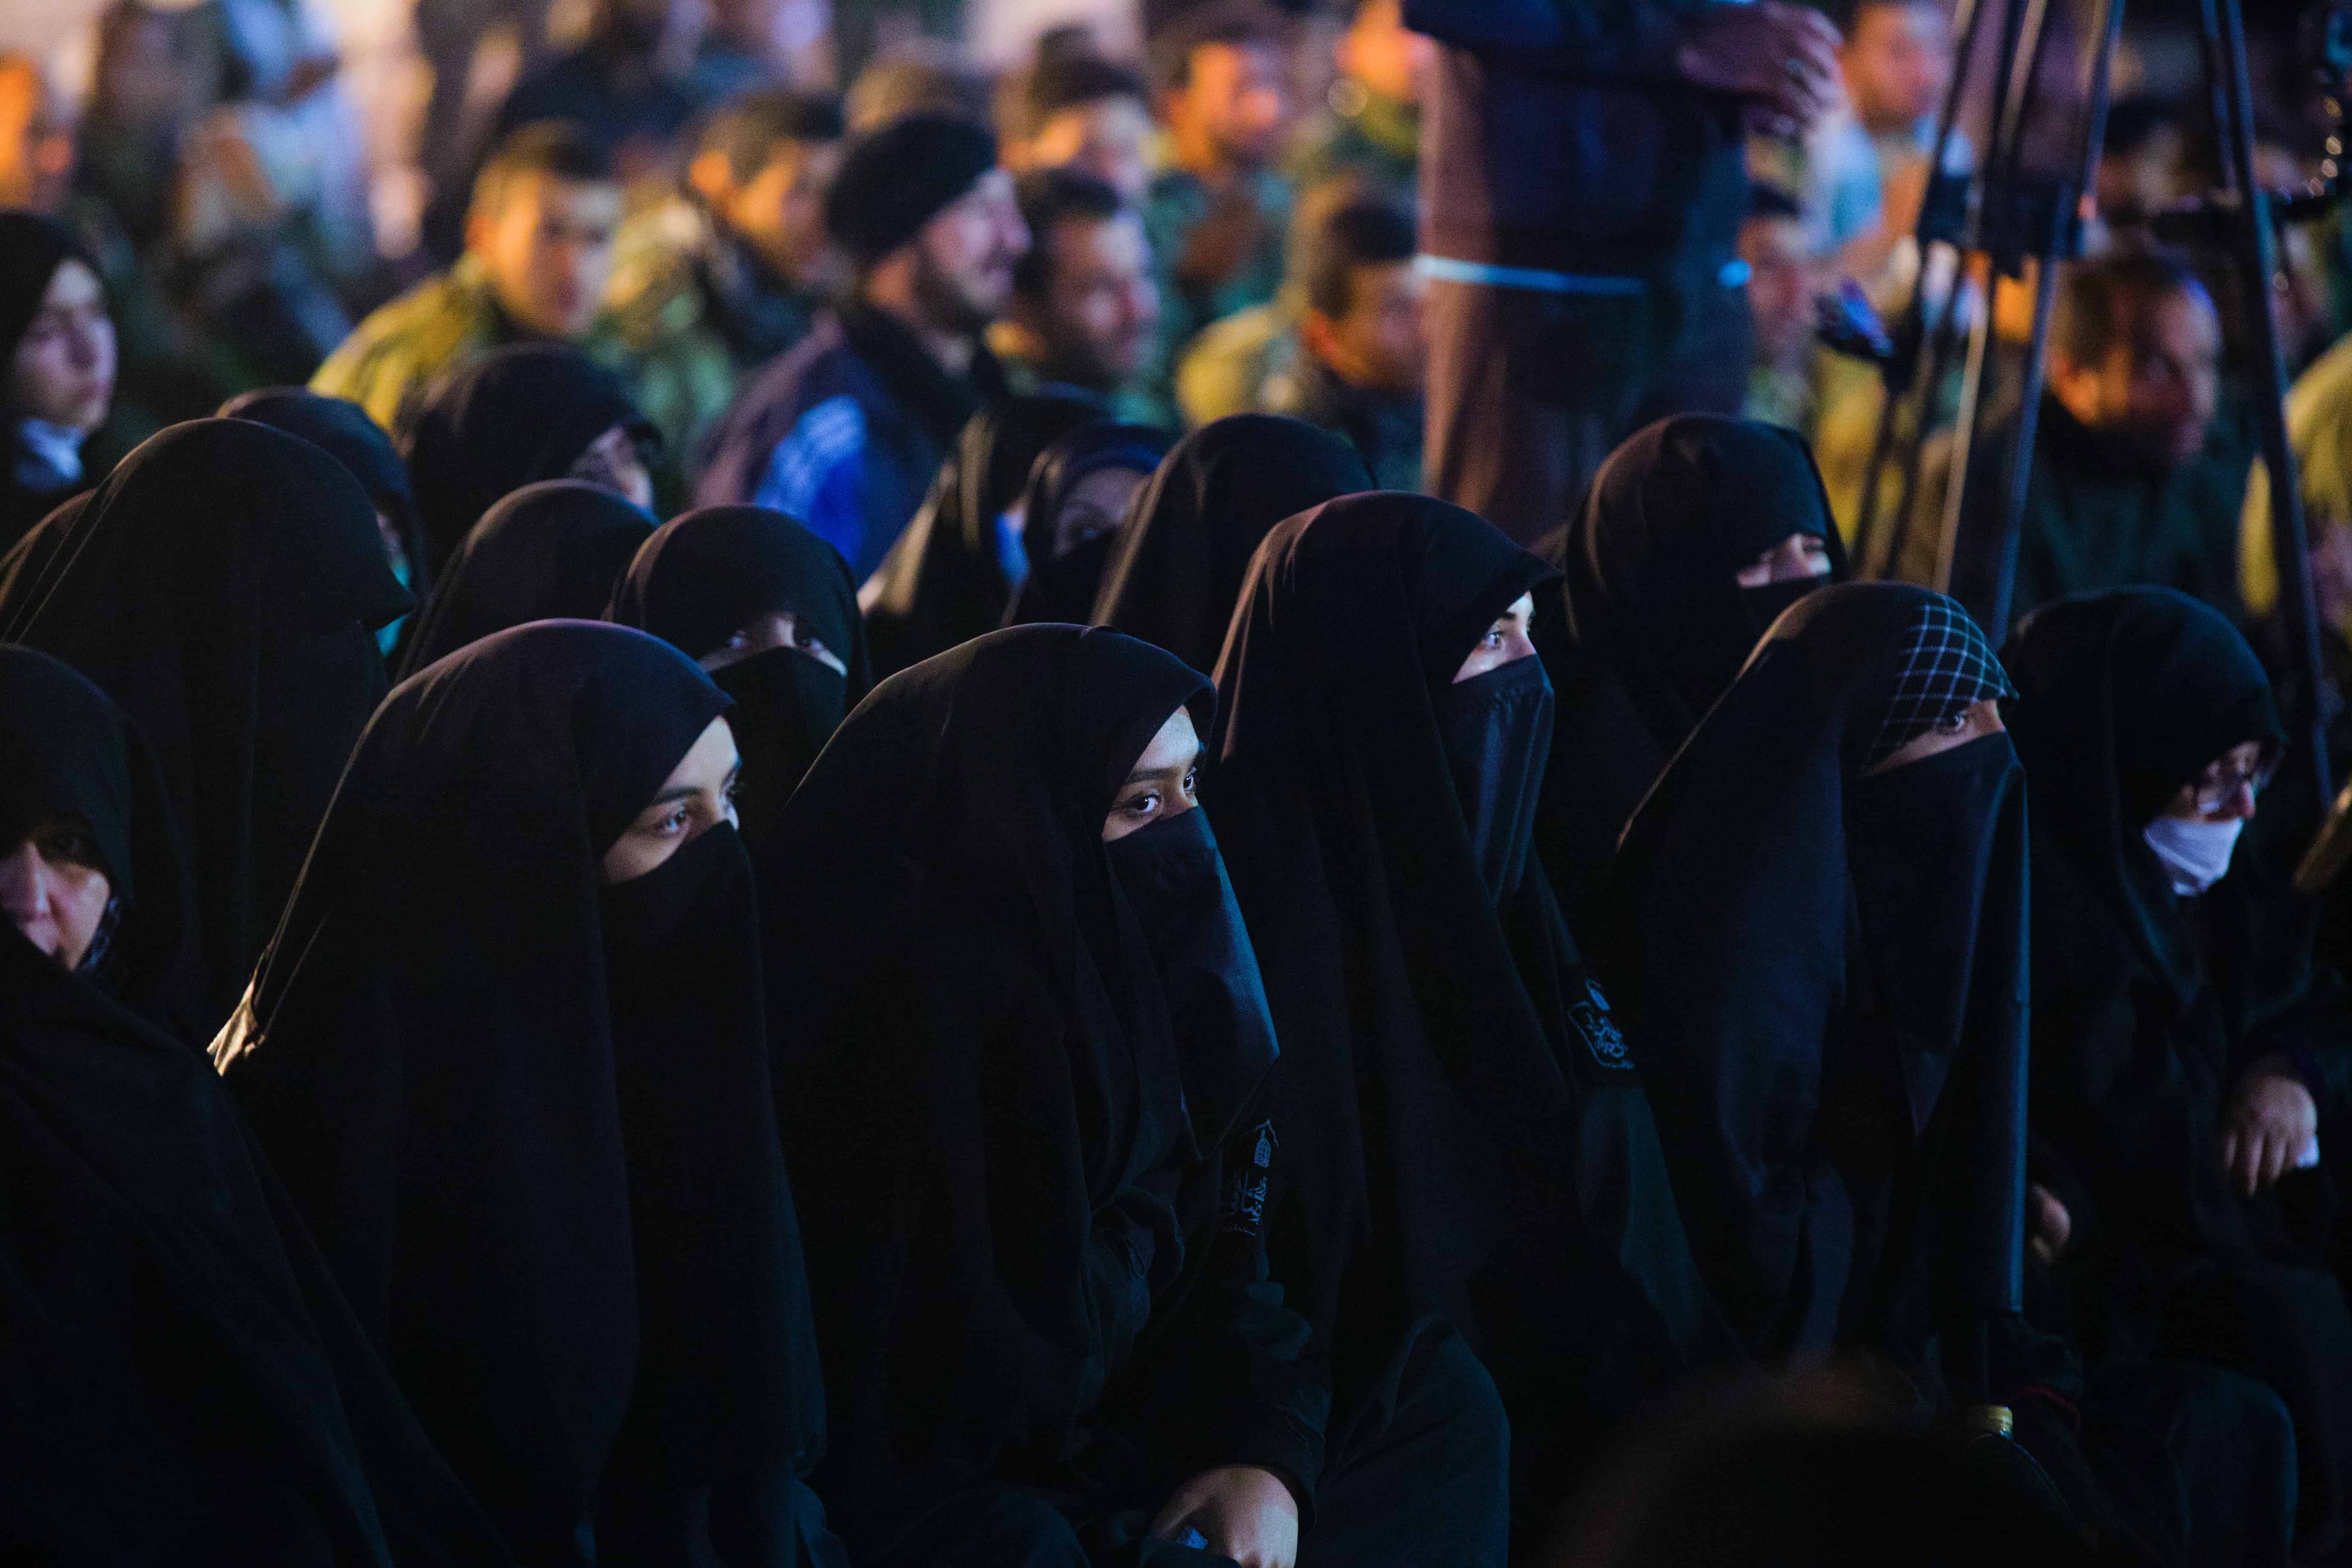 The Burkha Ban – Relooking France’s decision from the viewpoint of Security of Nation and Human Rights